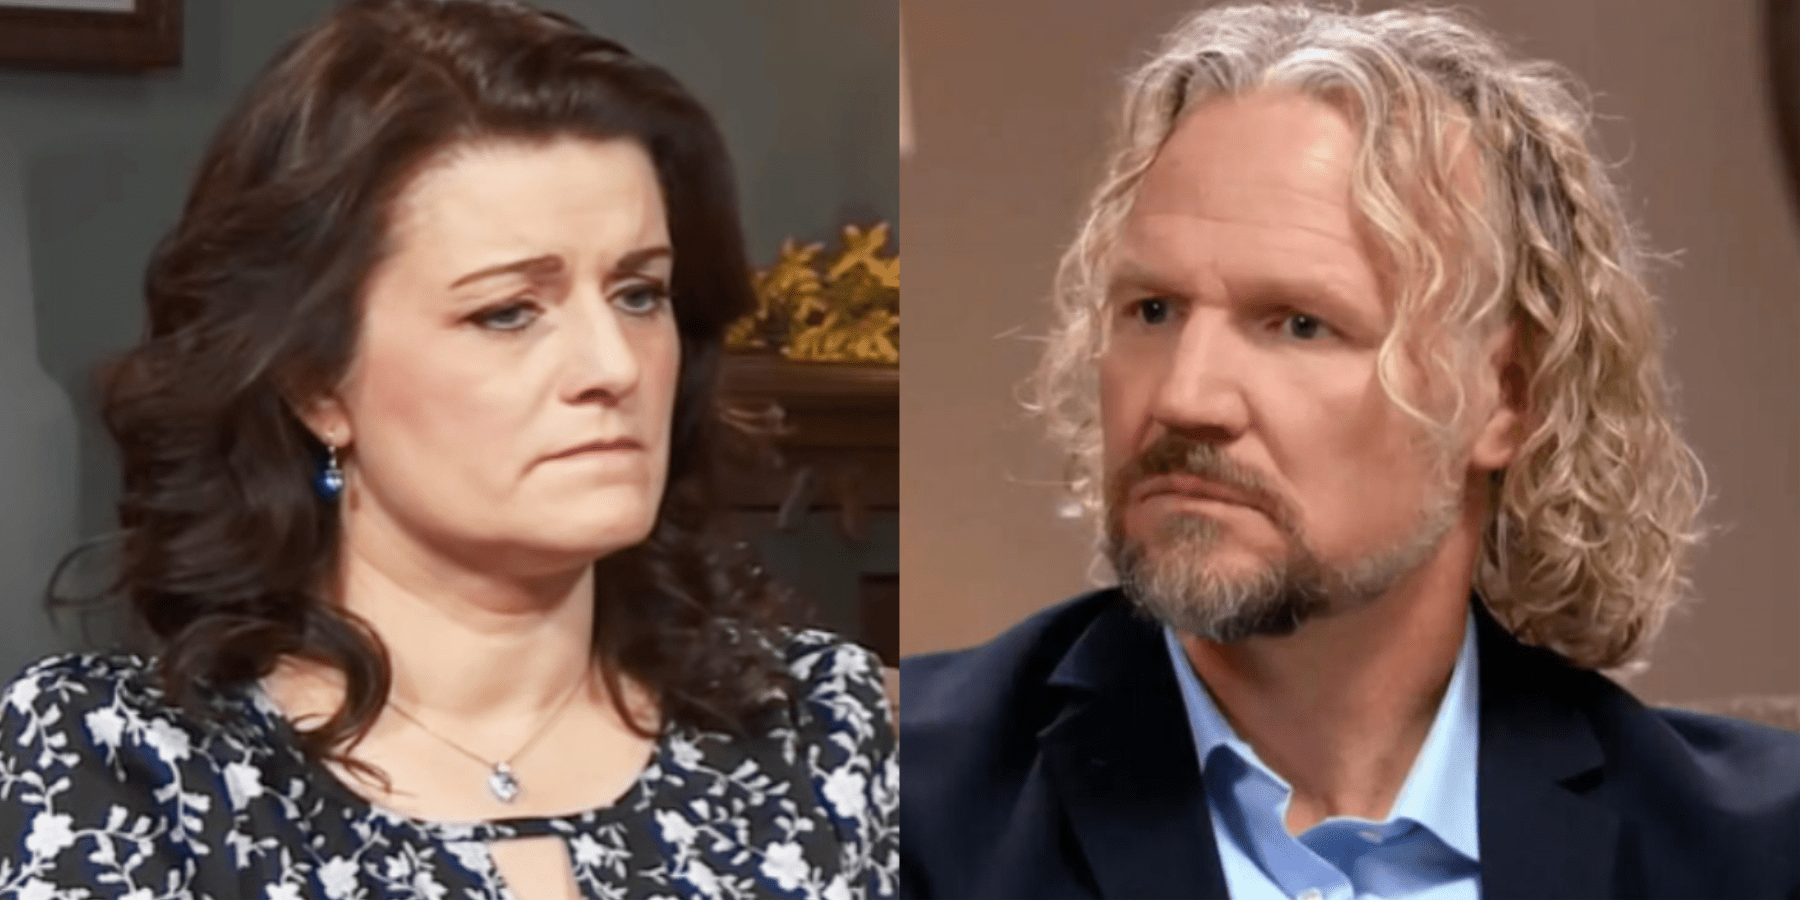 Robyn Brown and Kody Brown in side by side photographs taken during 'Sister Wives' confessionals.